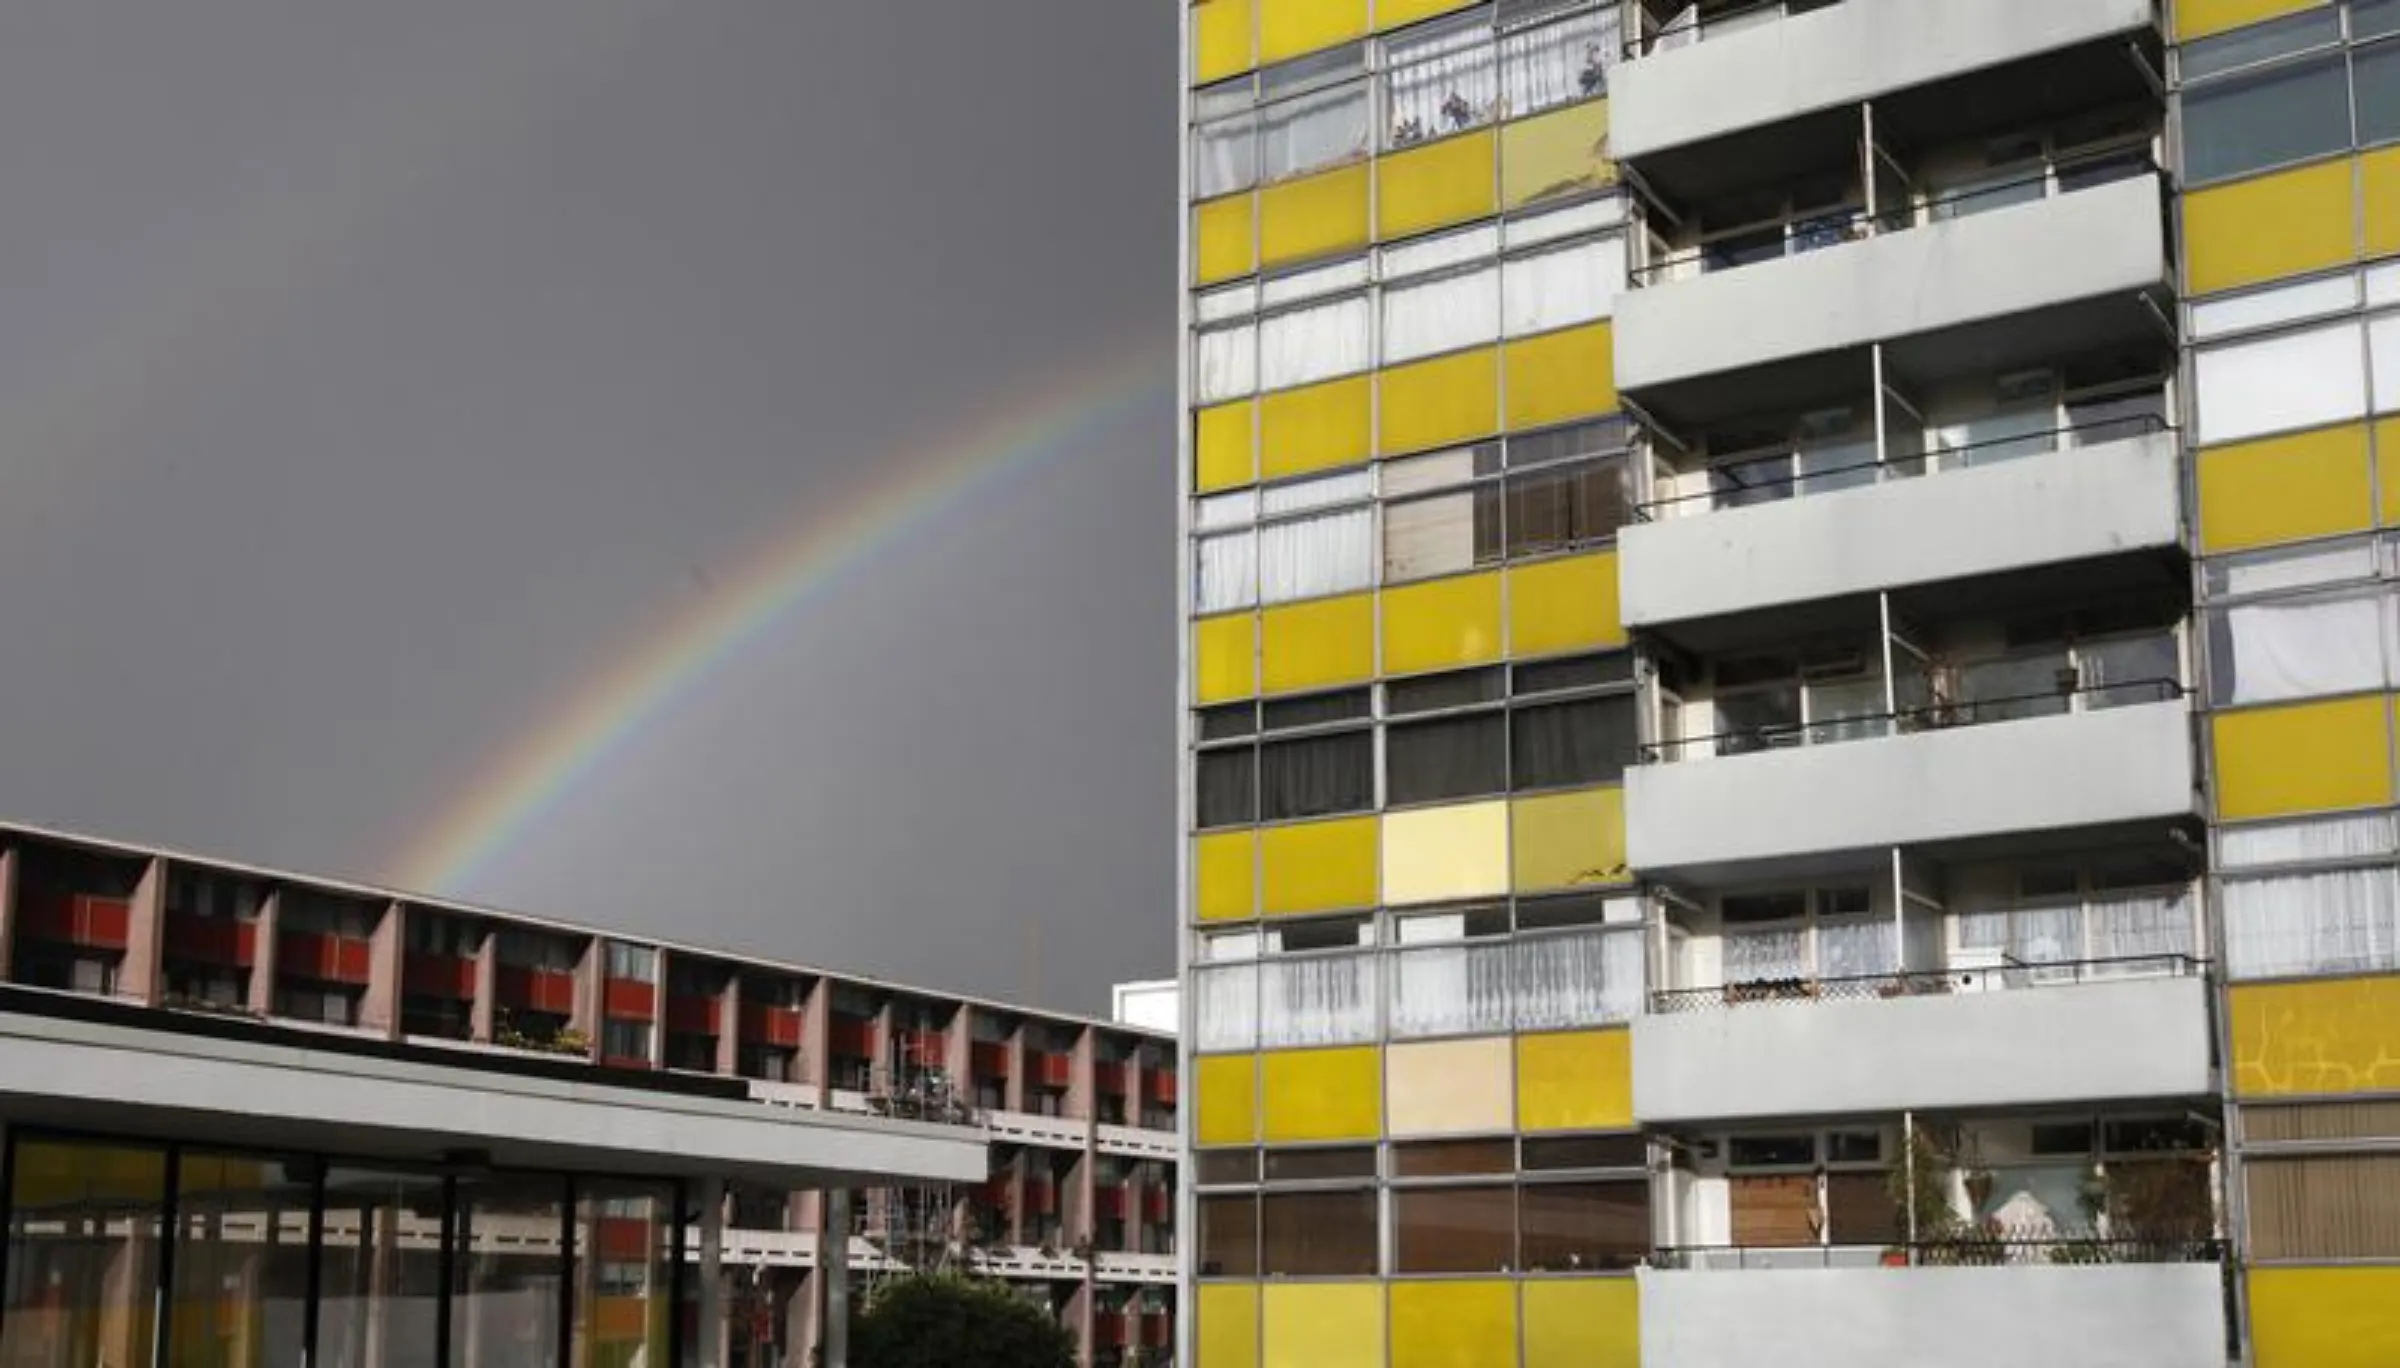 A rainbow appears over a housing estate in east London, March 3, 2014. REUTERS/Suzanne Plunket